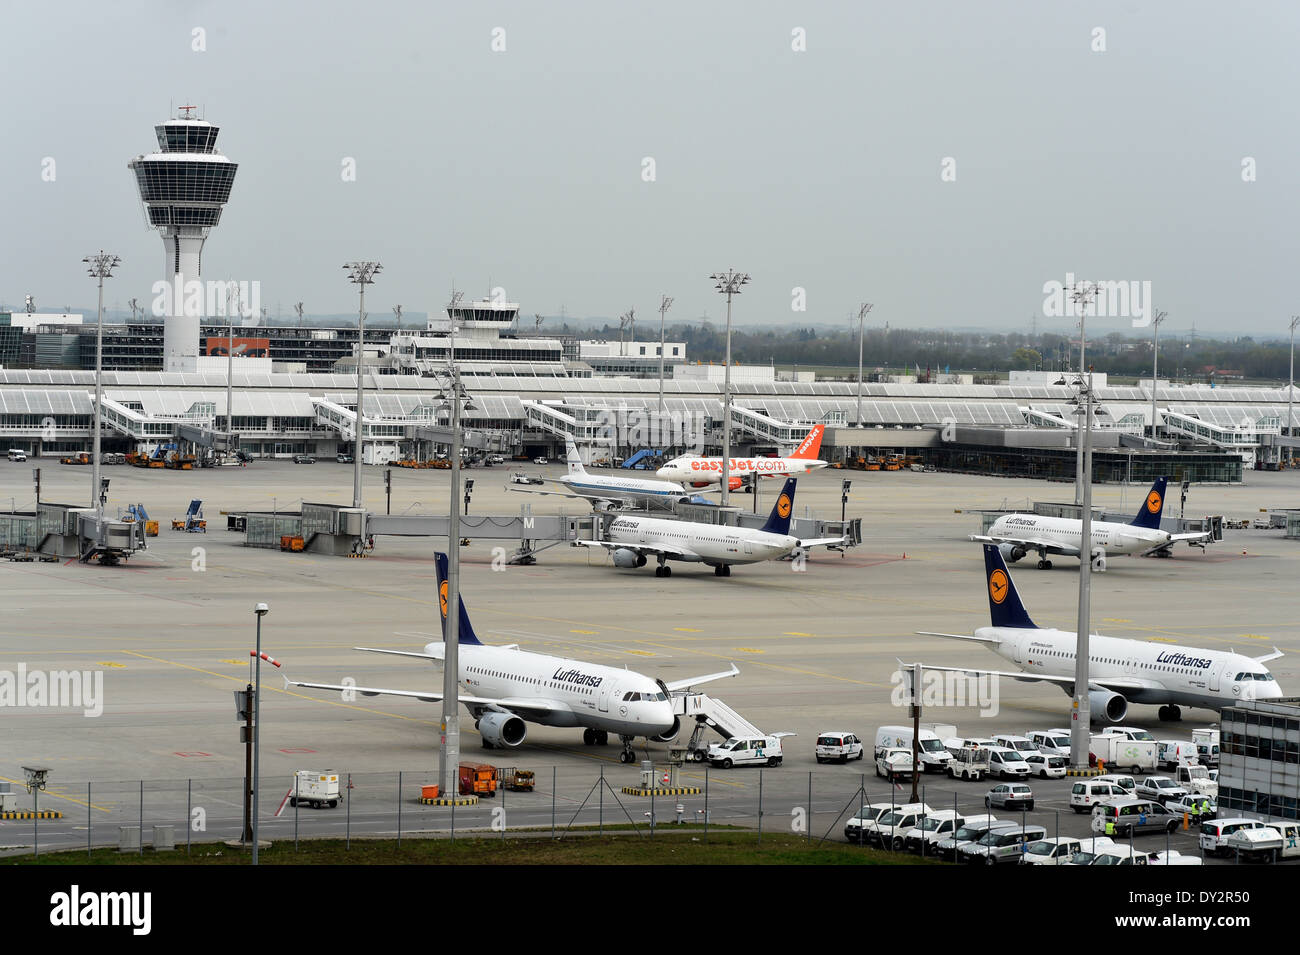 Franz-Josef-Strauß Airport in Munich ( Germany, Bavaria ) during the strike of the Lufthansa pilots on 3 April 2014. Around 3800 flights had been canceled. Stock Photo